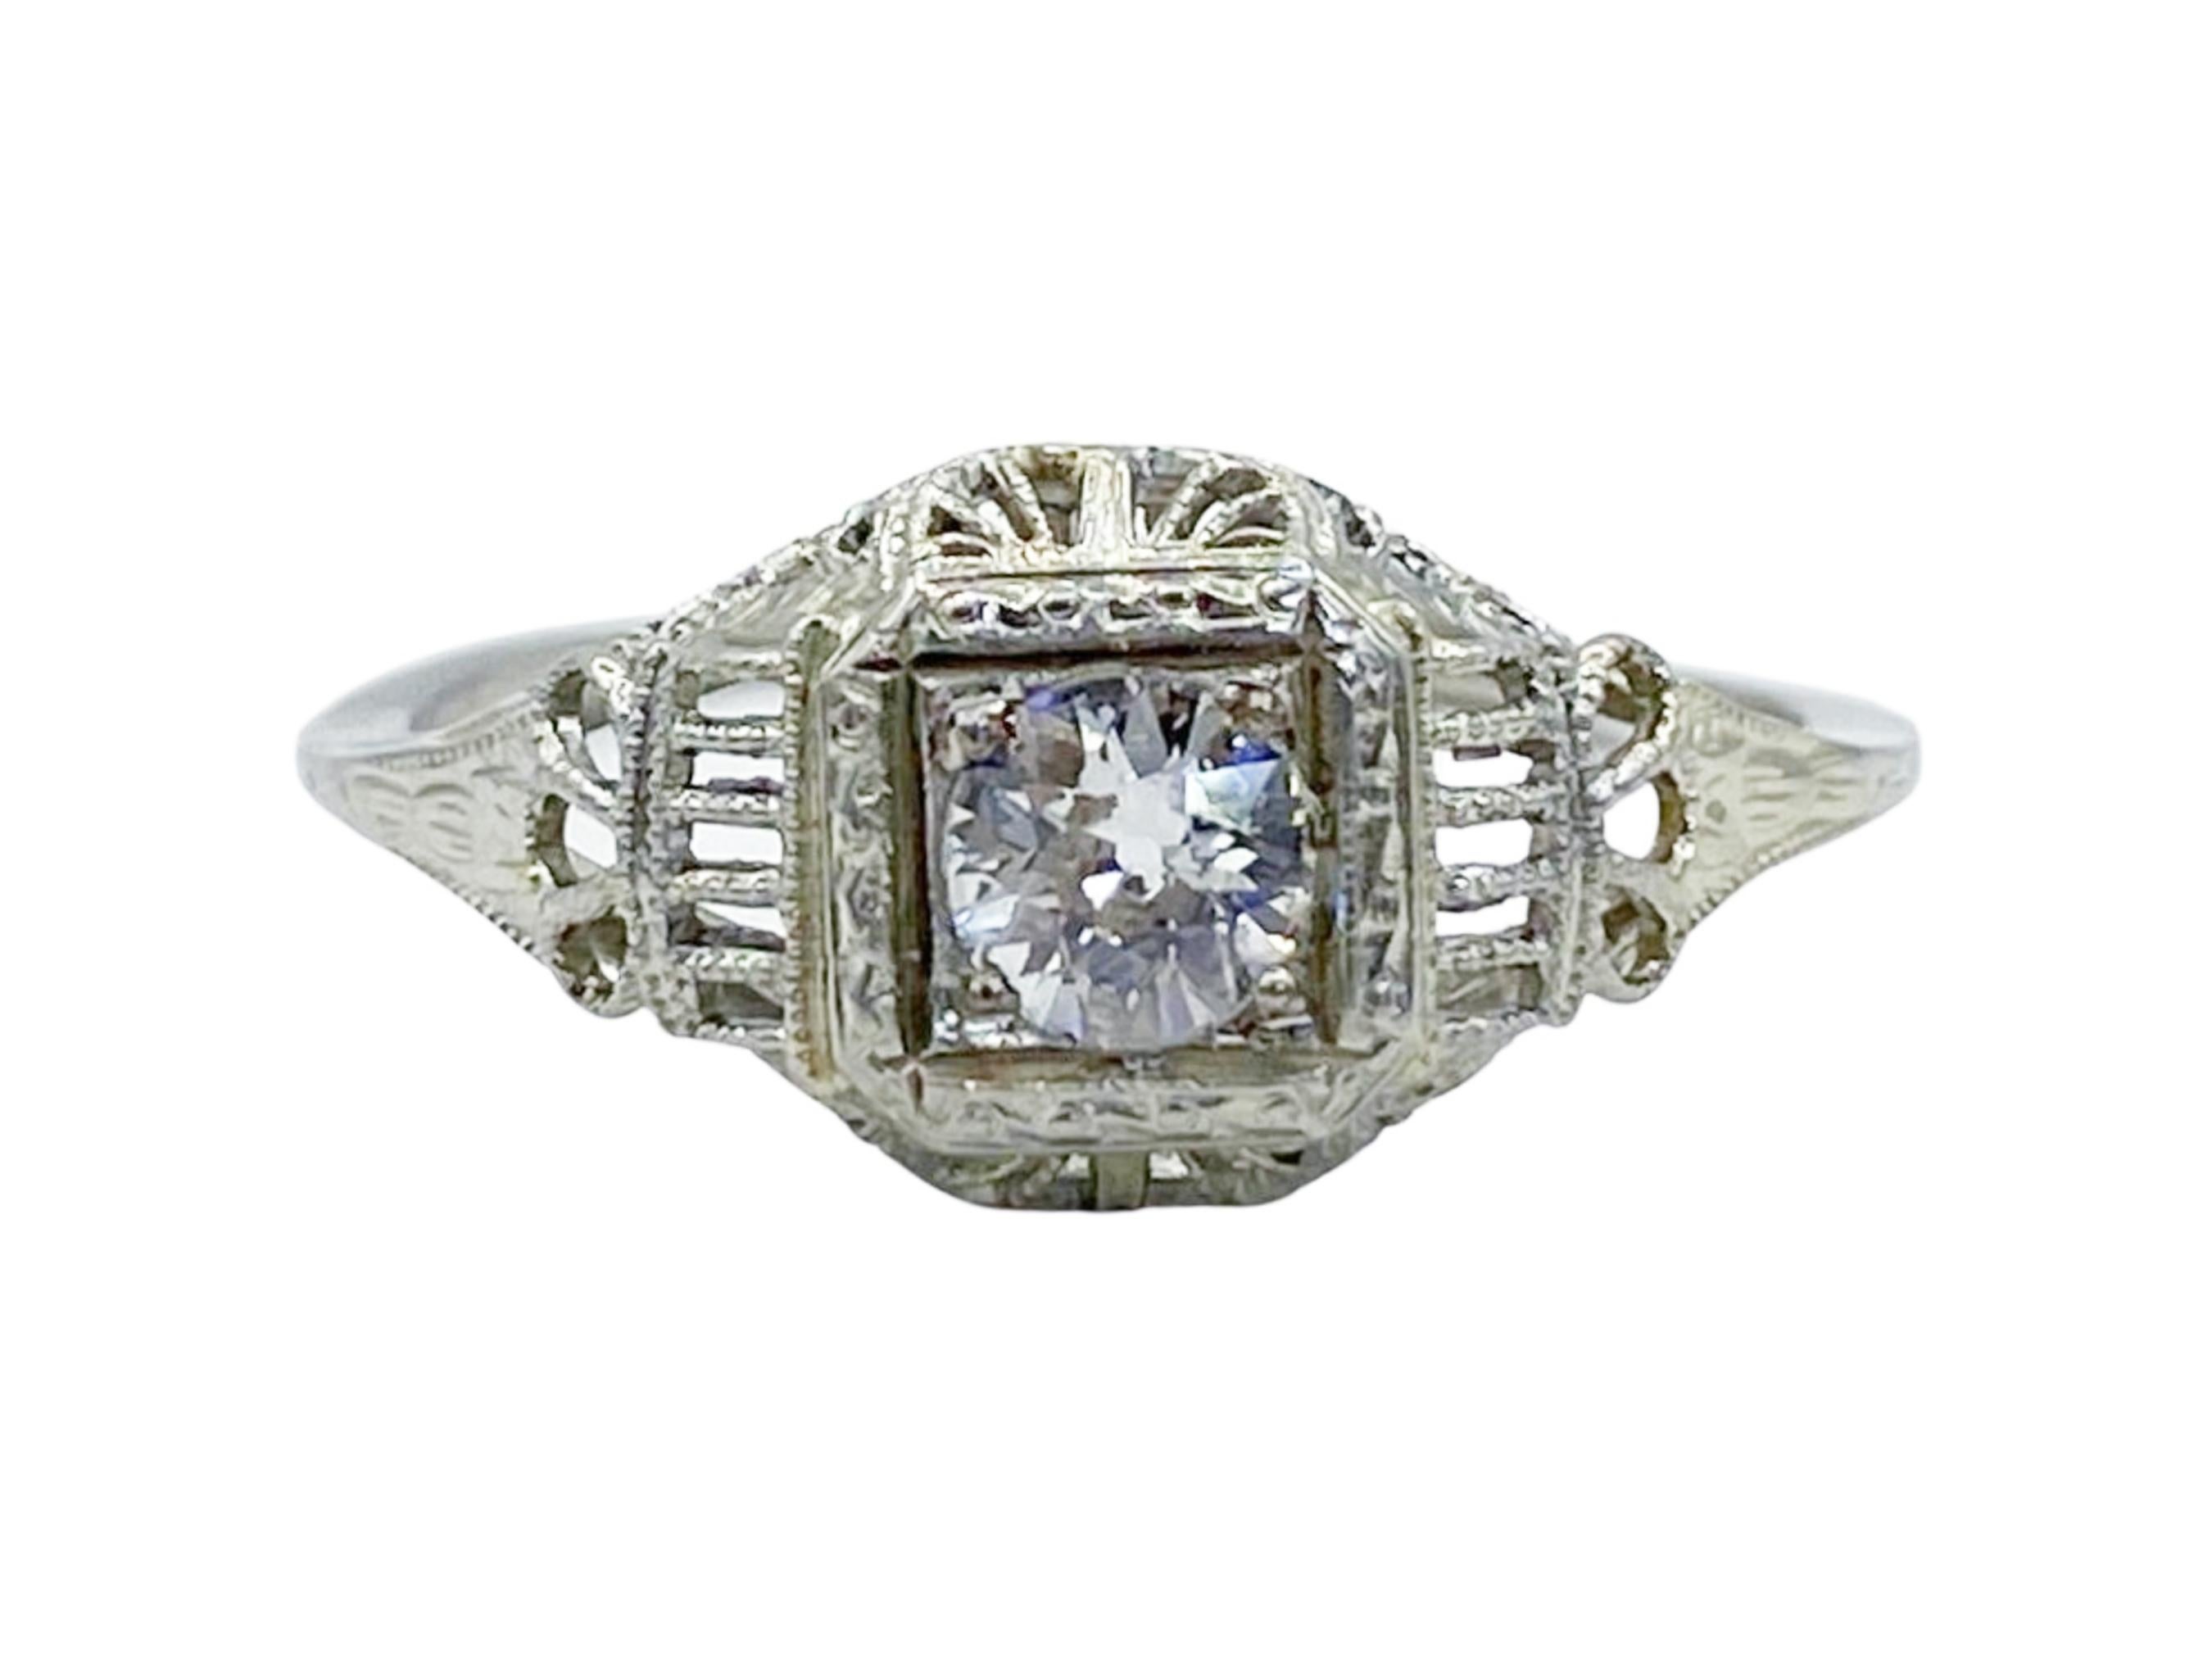 Make a statement with this one-of-a-kind antique Art Deco diamond engagement ring! Crafted in exquisite 18K white gold, this beautiful ring features a sparkling 4.5mm prong-set Old European cut diamond surrounded by filigree detailing for an